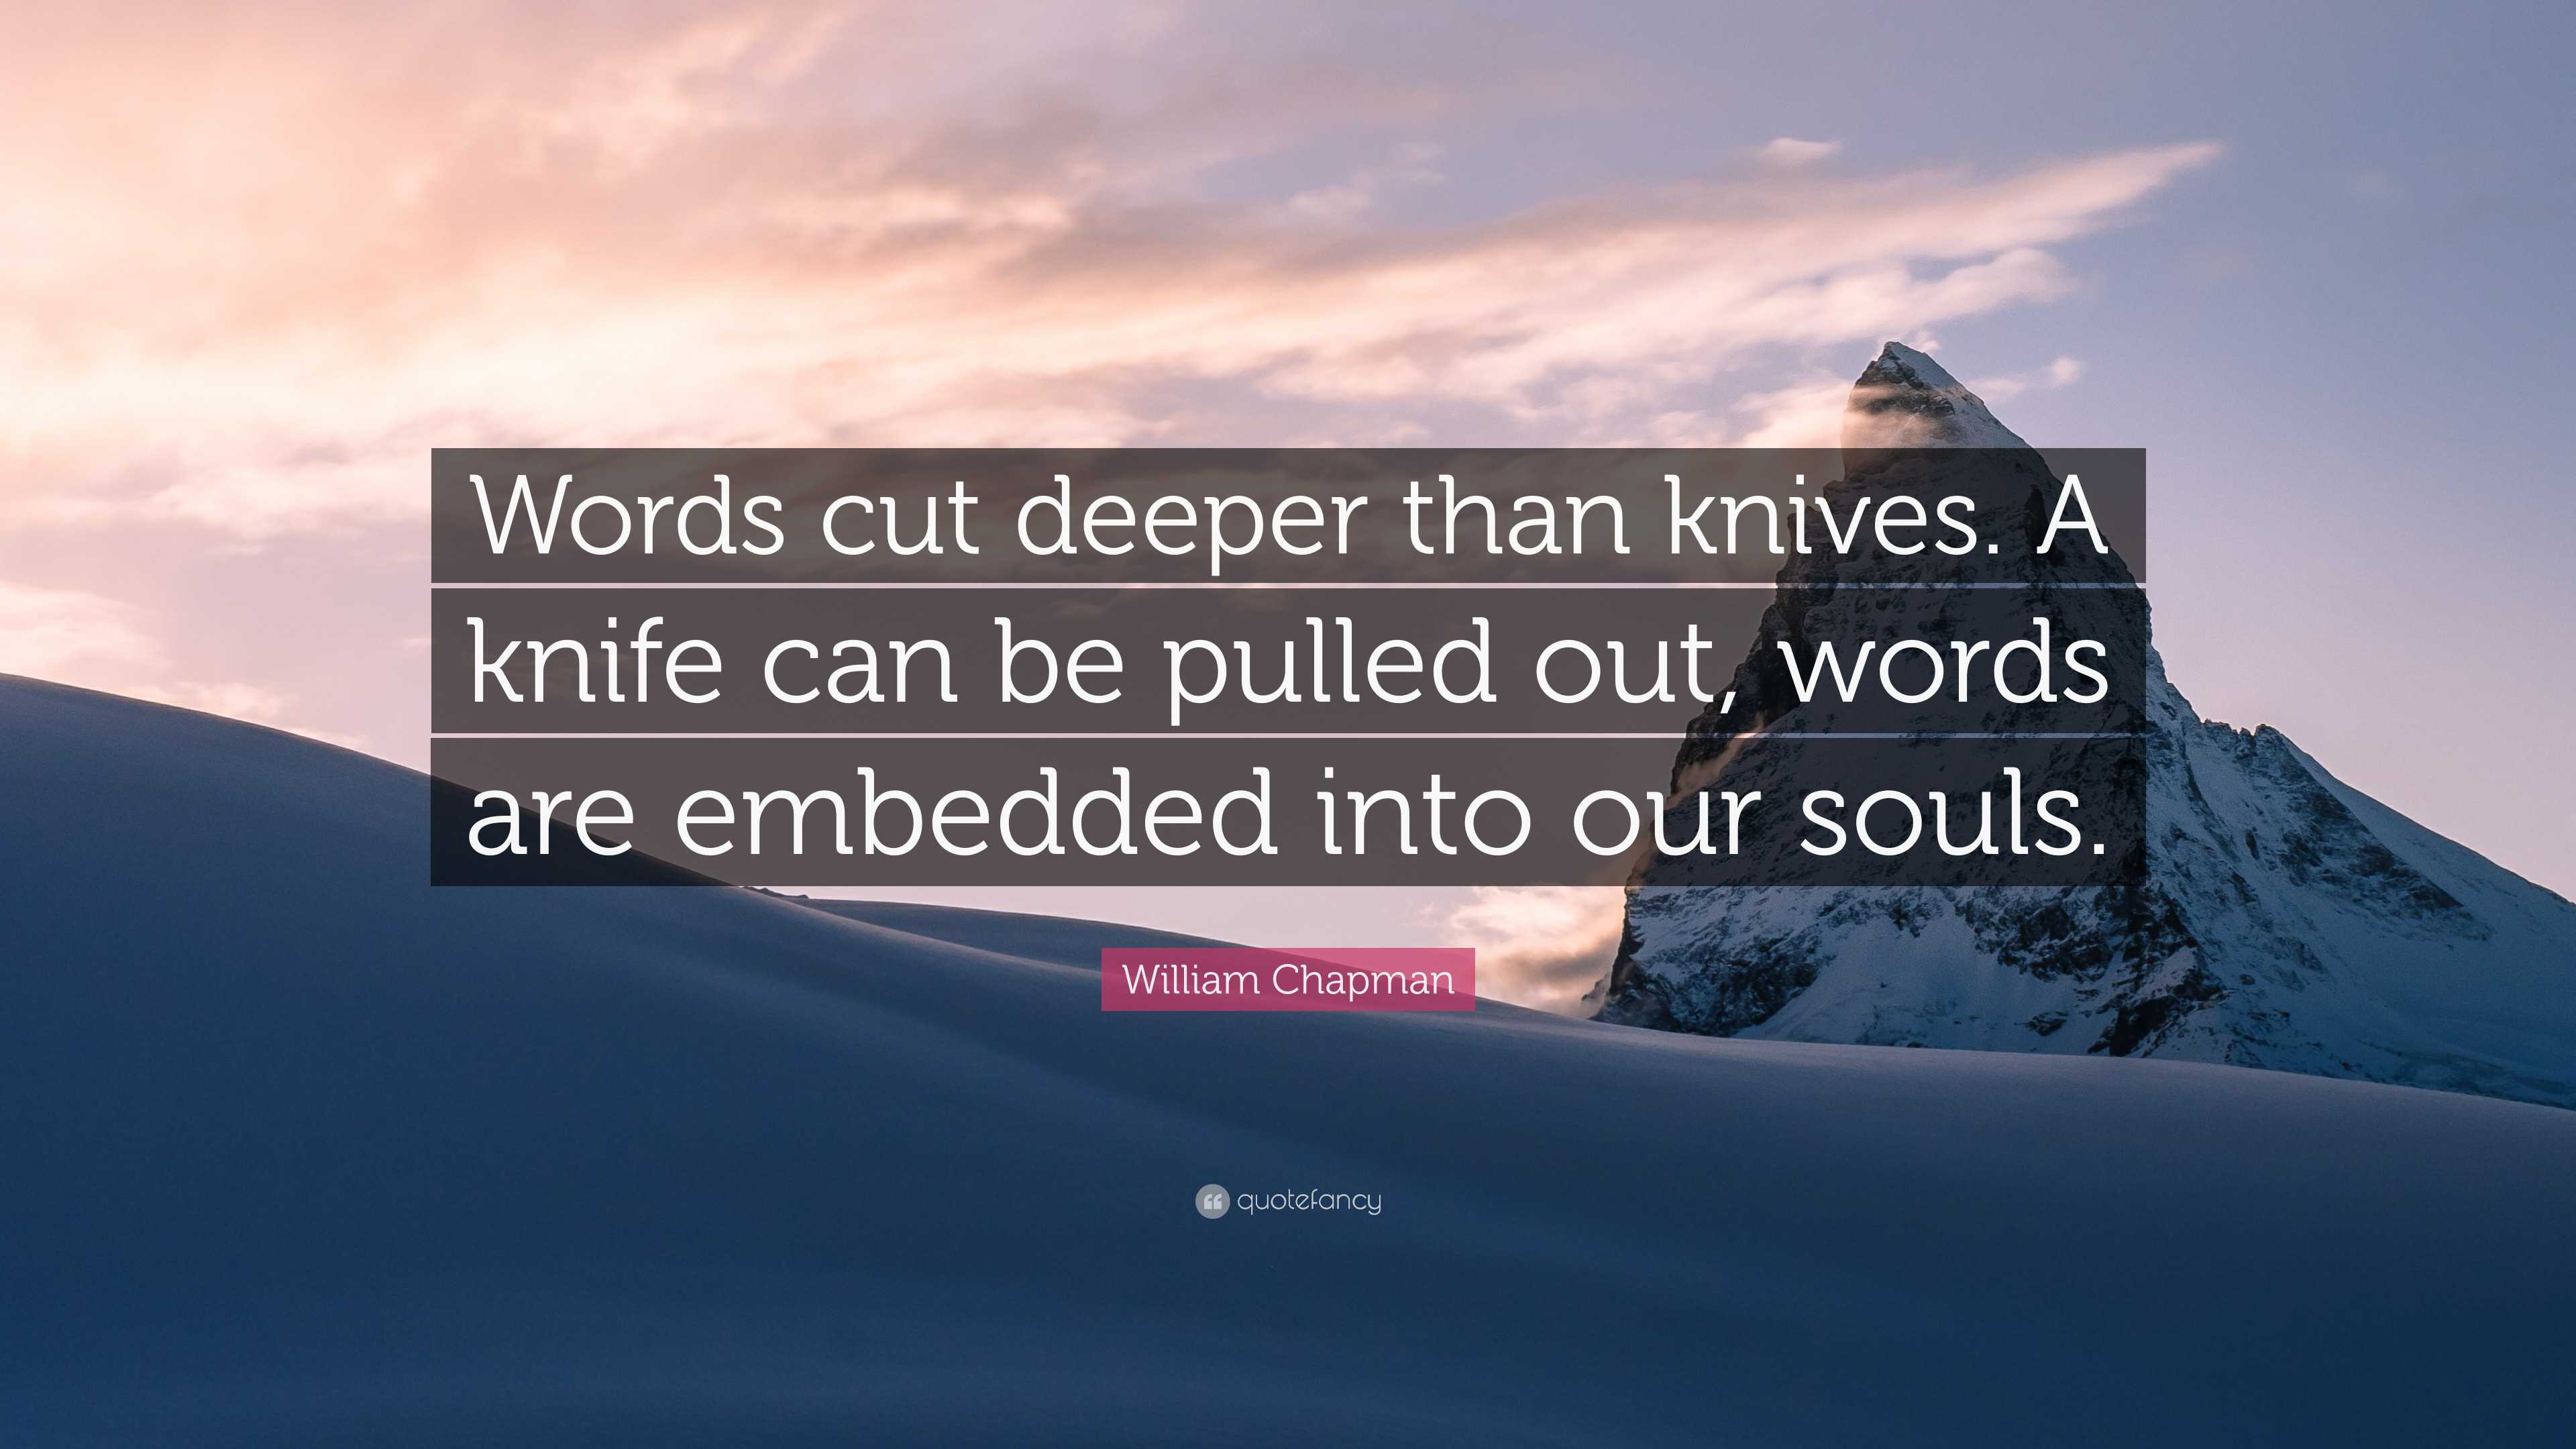 7719297-William-Chapman-Quote-Words-cut-deeper-than-knives-A-knife-can-be.jpg